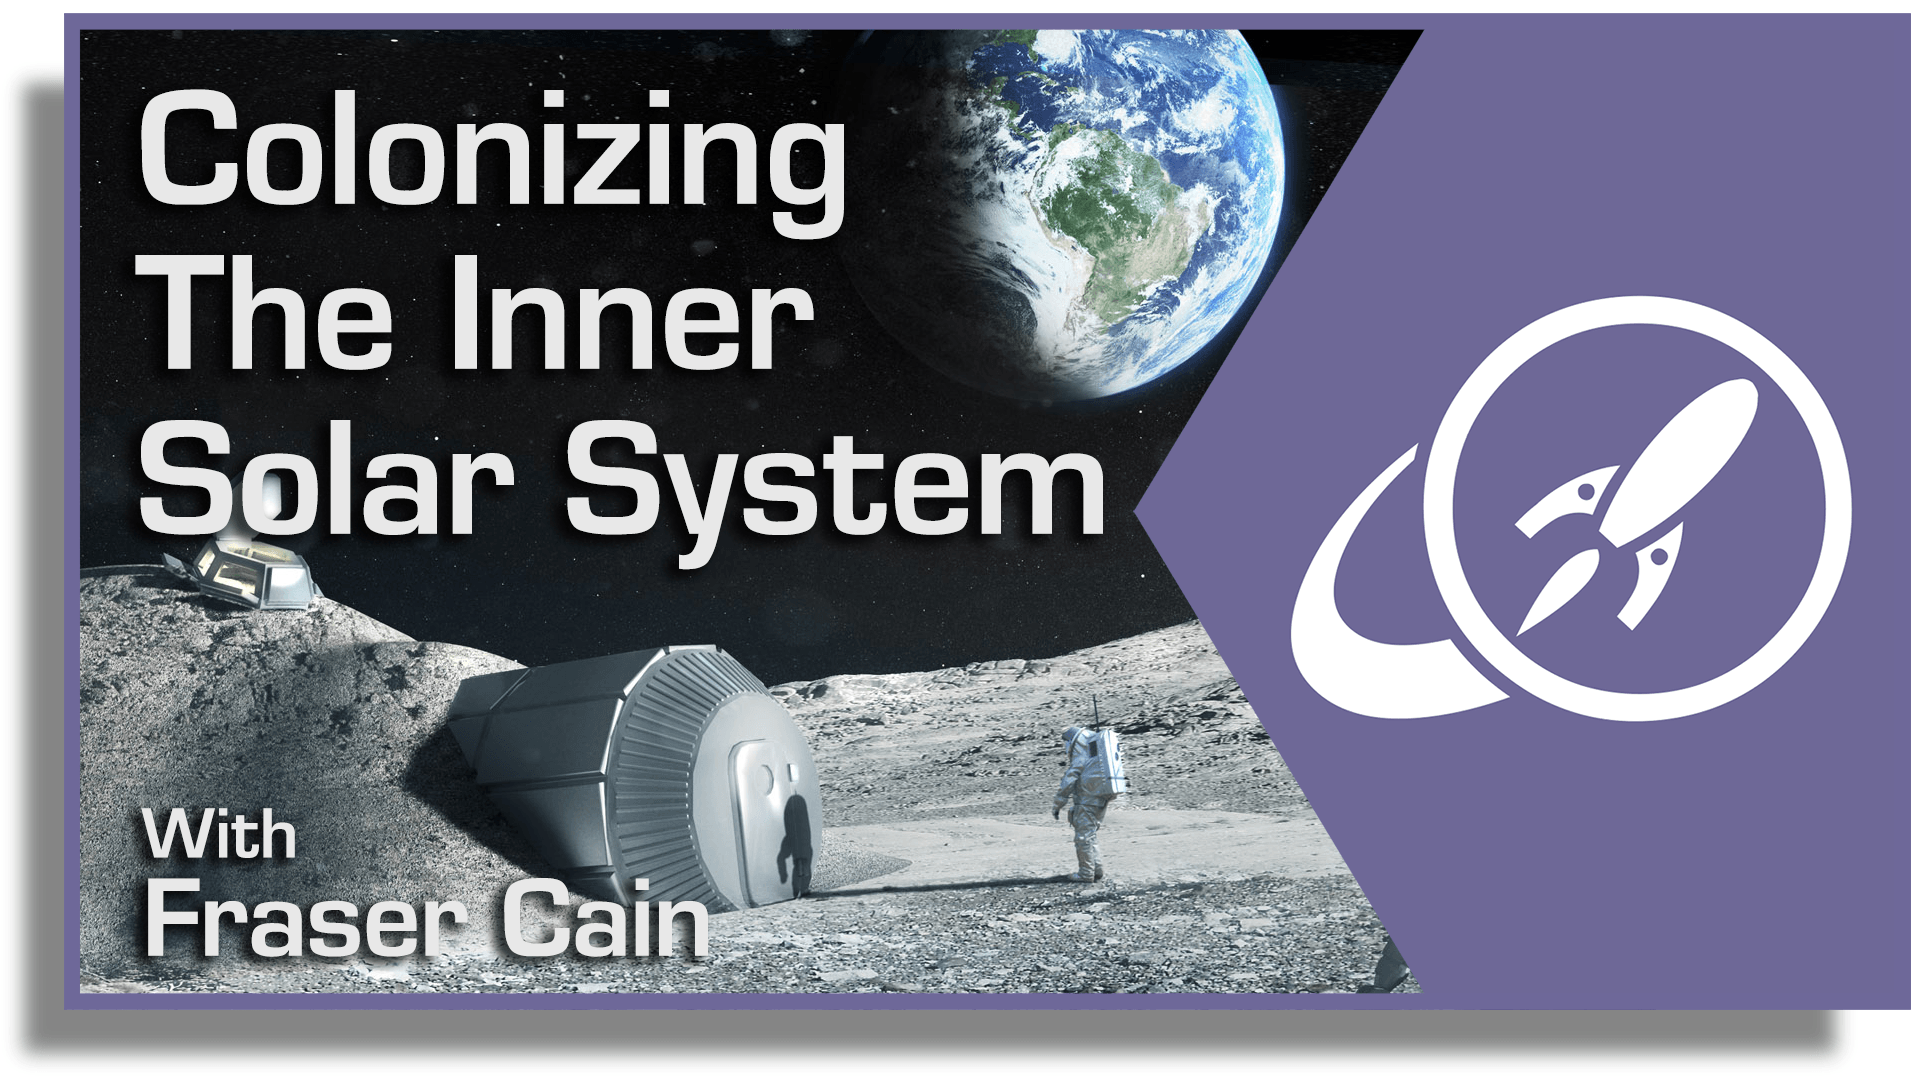 Colonizing The Inner Solar System